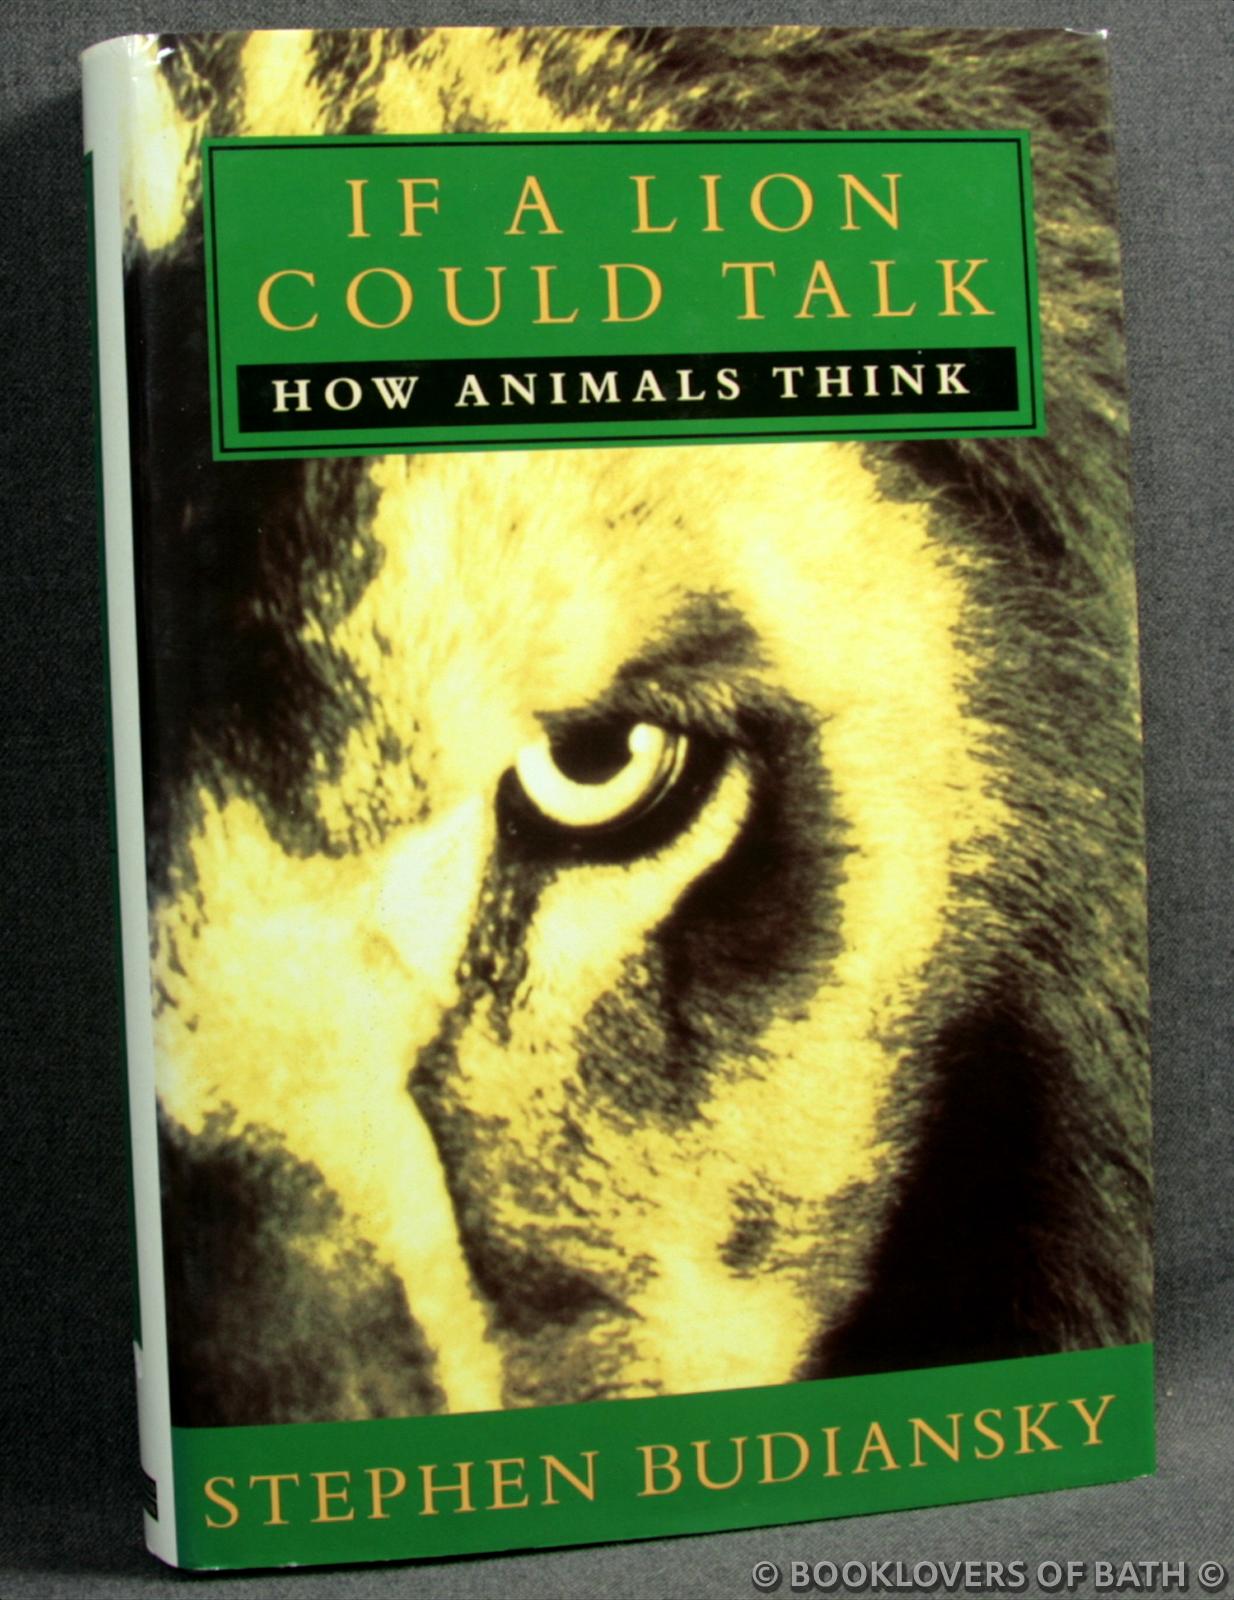 If A Lion Could Talk: How Animals Think